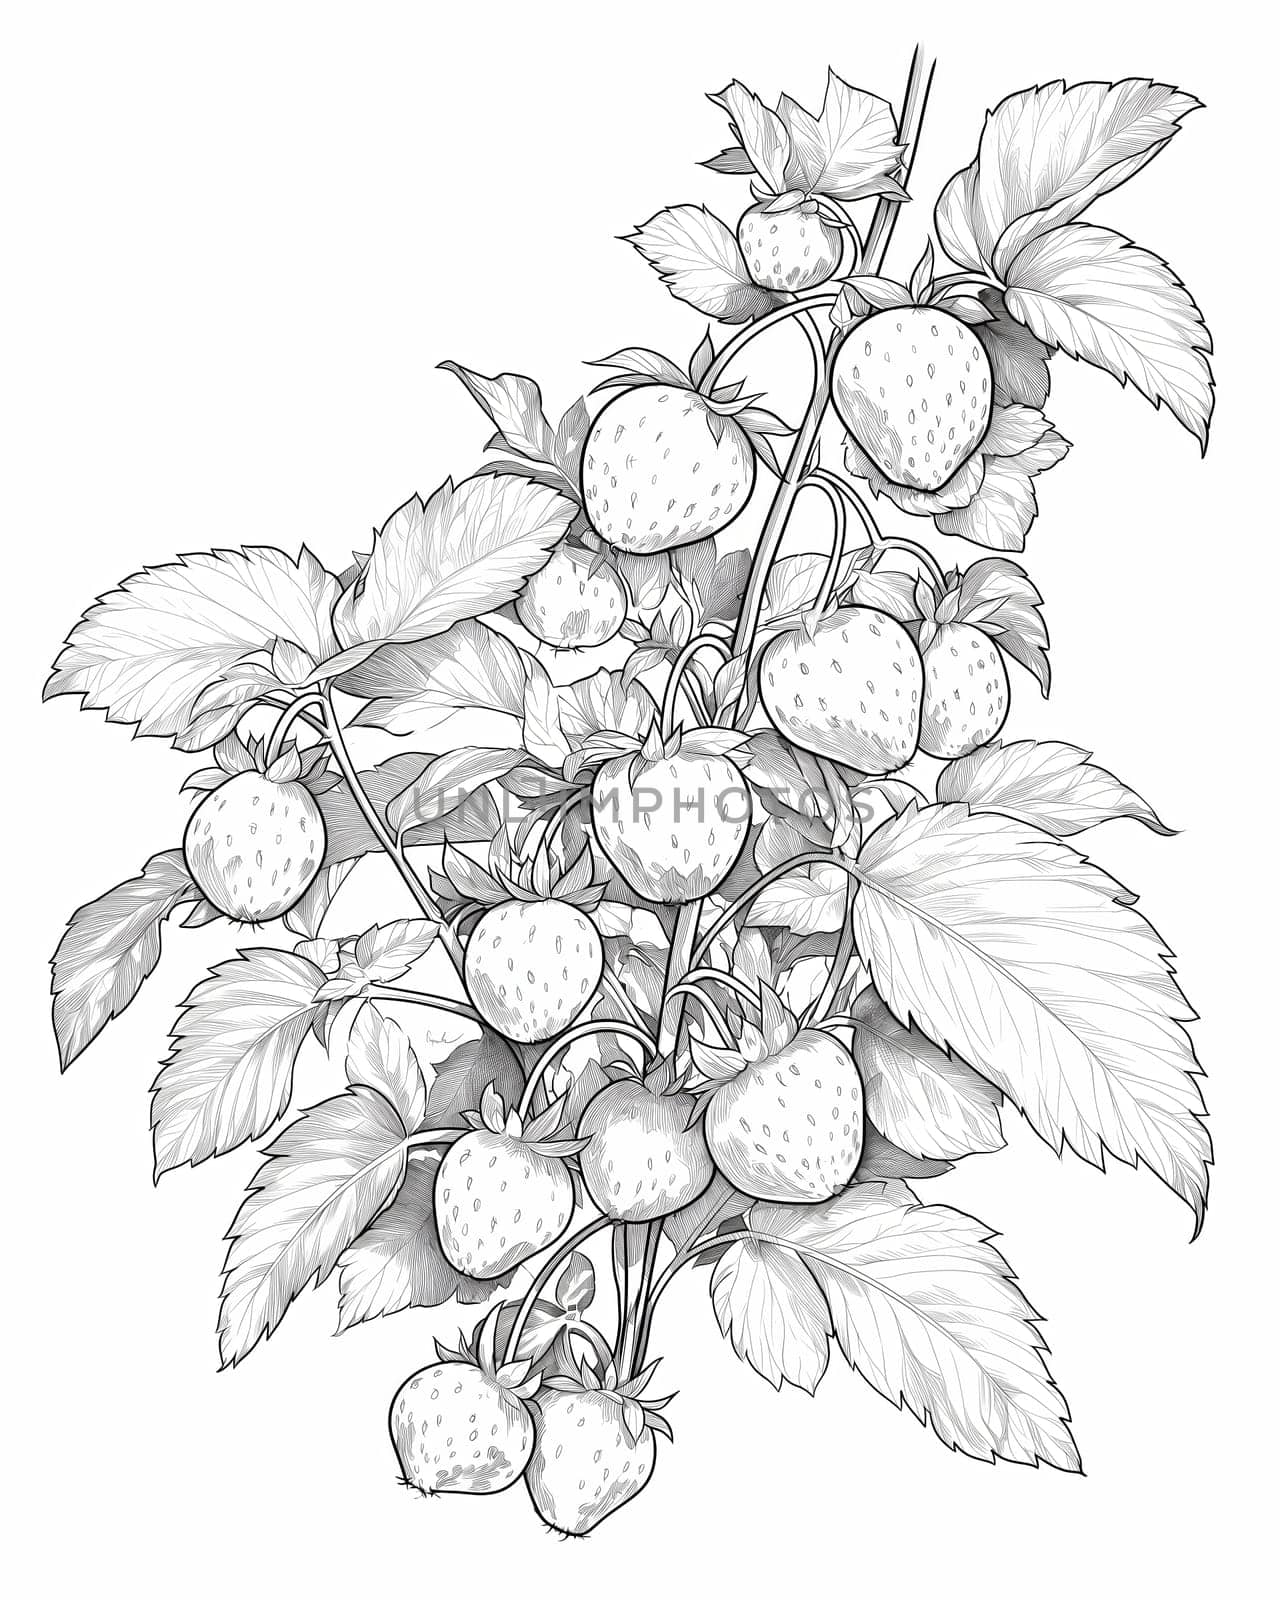 Coloring book for kids, coloring plants, berries. by Fischeron